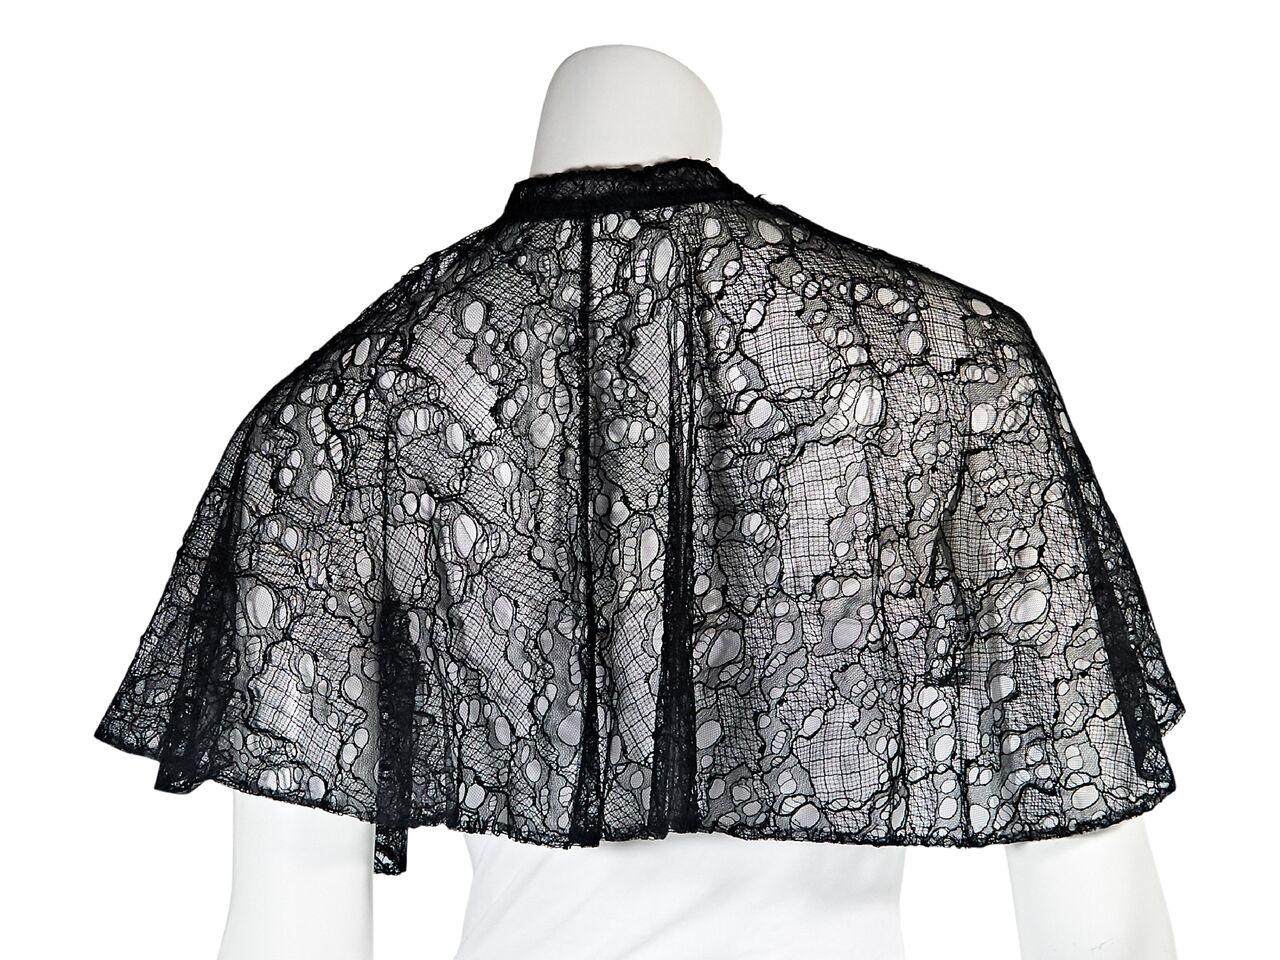 Product details:  Black lace capelet by Alexander McQueen.  Self-tie ribbon closure.  20